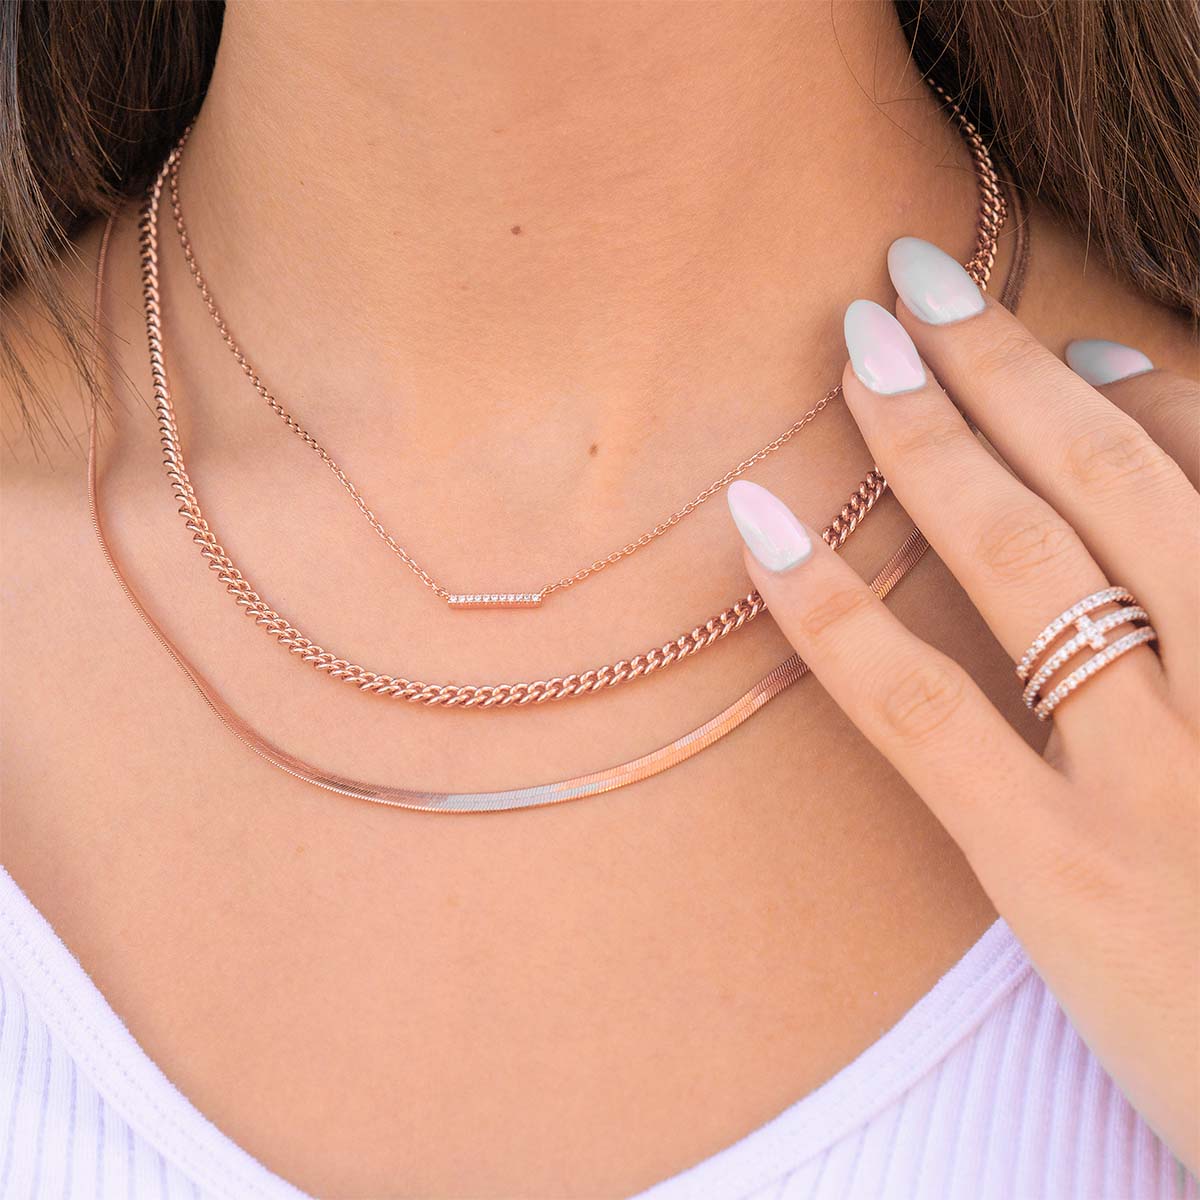 Cute rose gold layered necklaces on woman